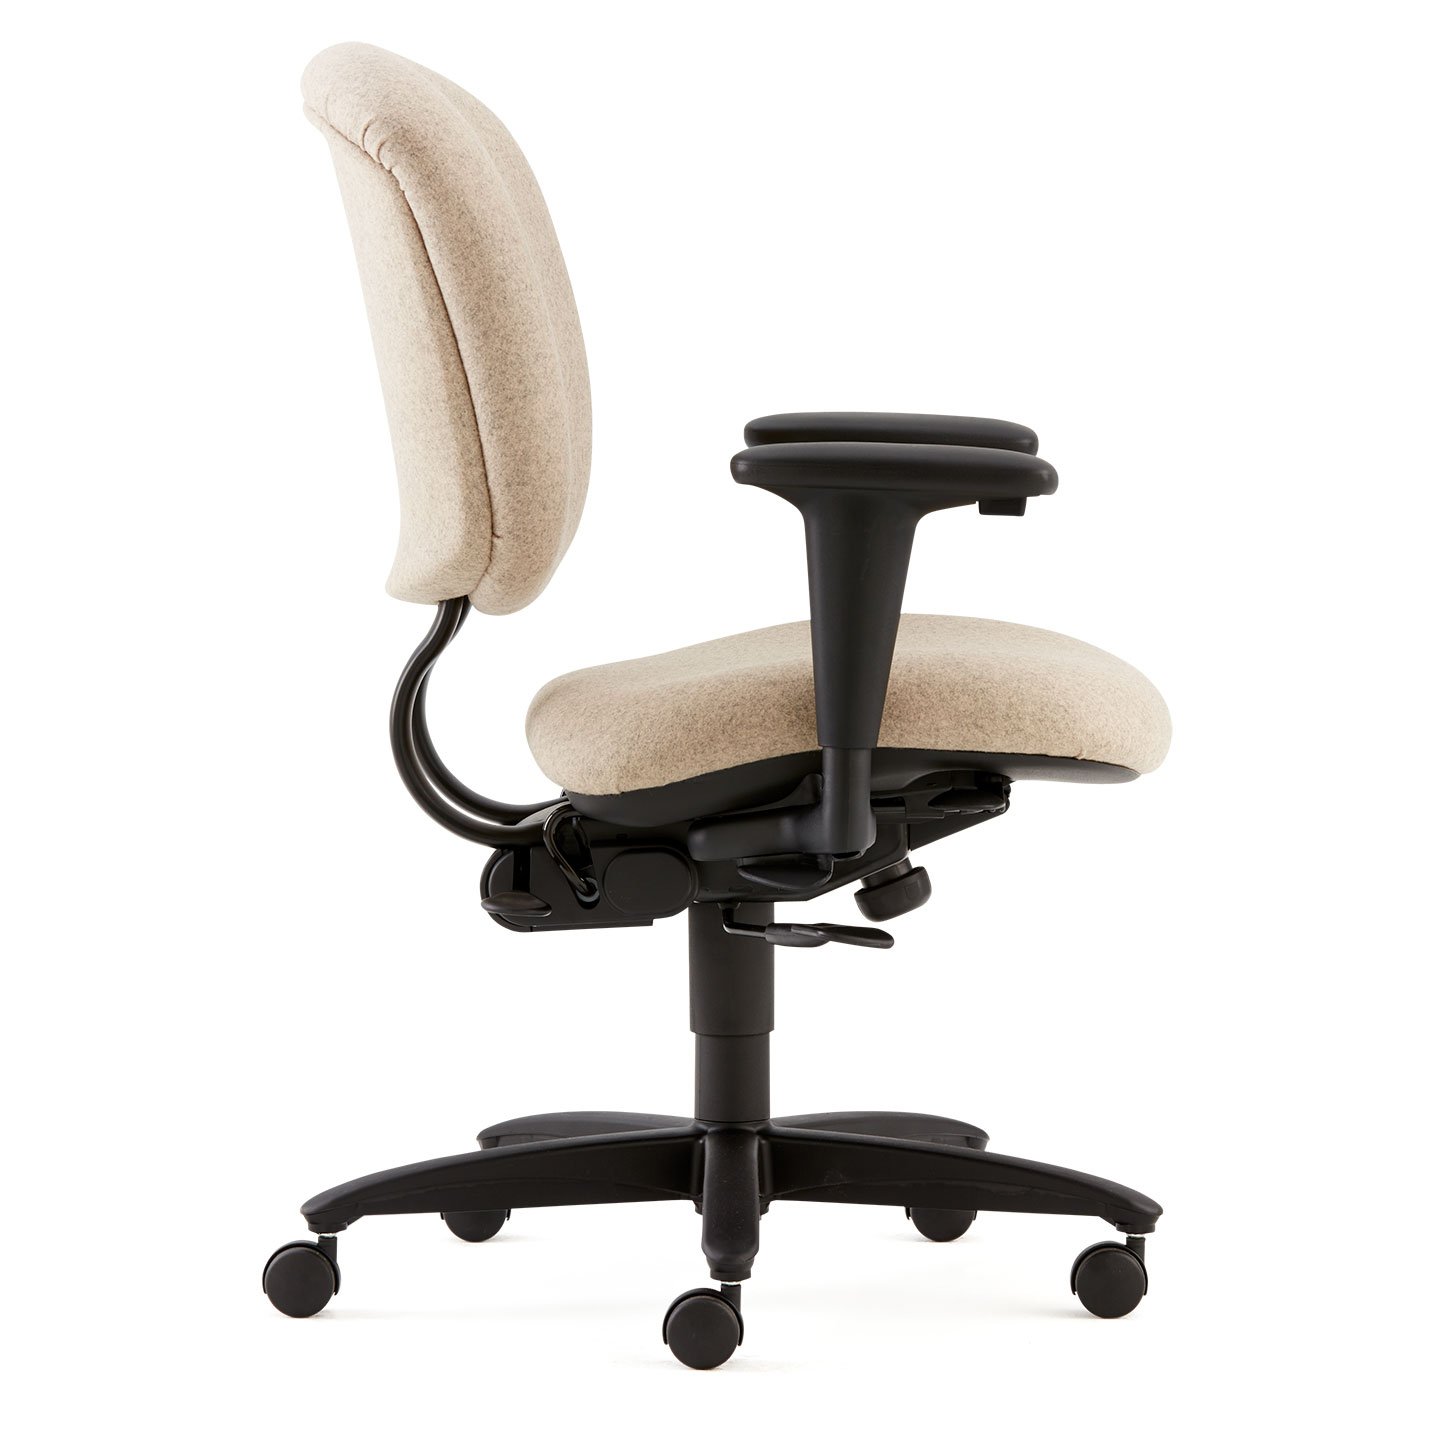 Haworth Improv H E desk chair in beige upholstery in a side view